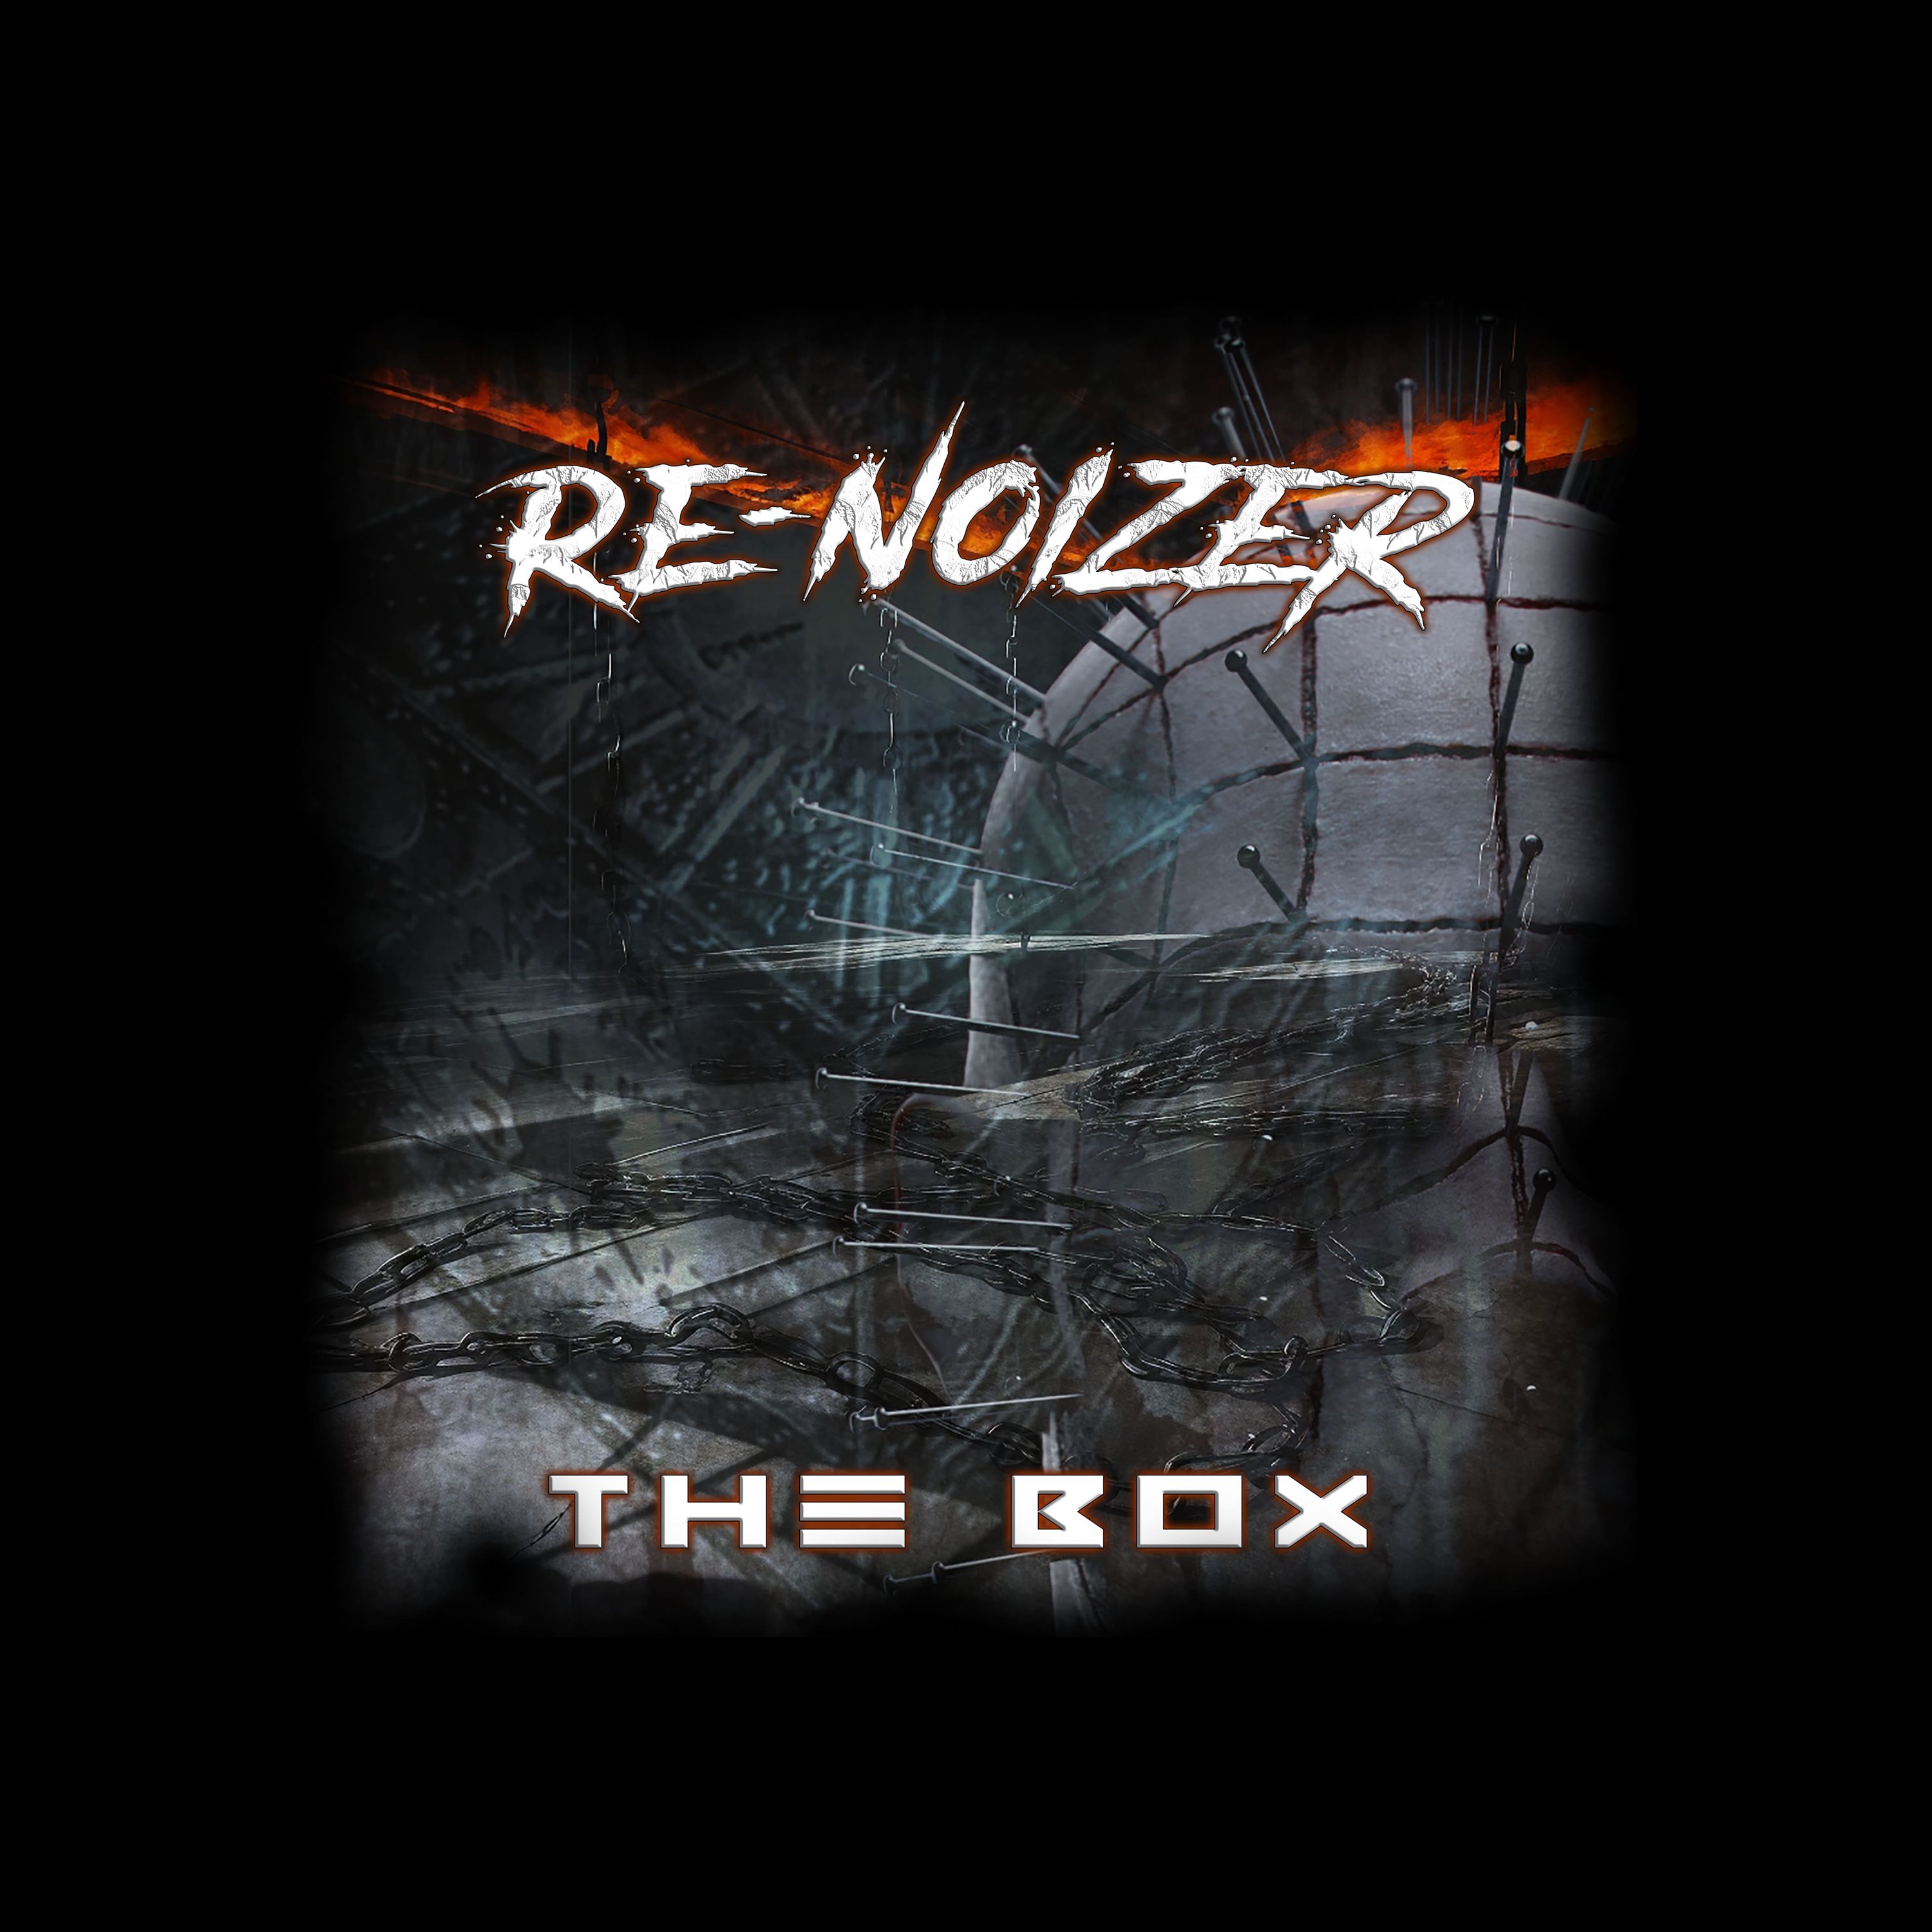 track ... Re-noiZer ... The Box